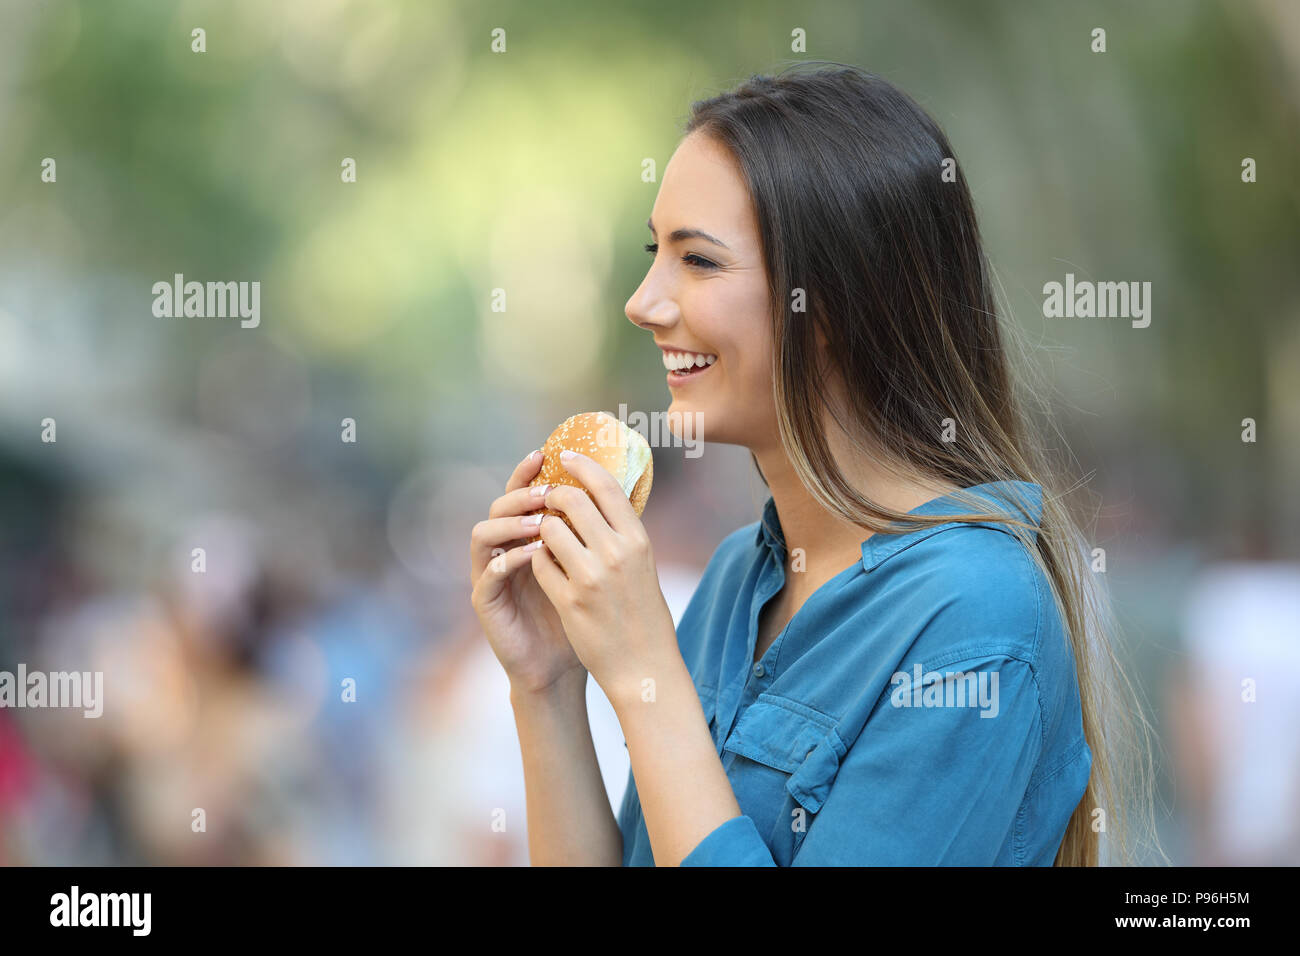 Profile of a woman holding a burger on the street Stock Photo